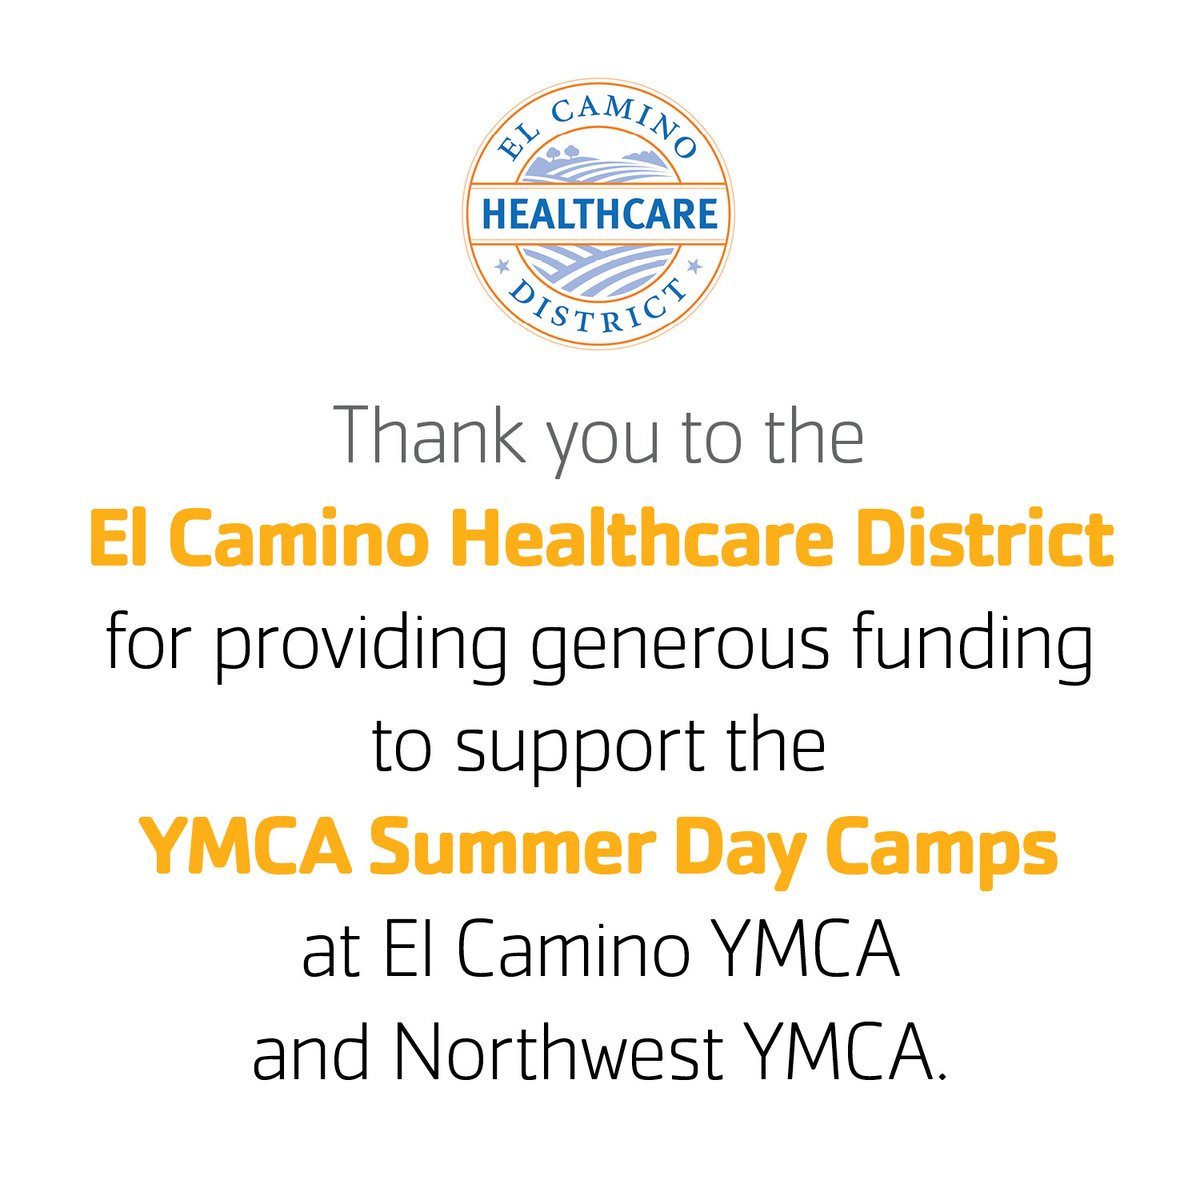 Y Summer Day Camp is a safe, fun-filled summer adventure! Learn more and register now at ymcasv.org/summer. Thank you to the El Camino Healthcare District for providing generous funding to support the YMCA Summer Day Camps at El Camino YMCA and Northwest YMCA.